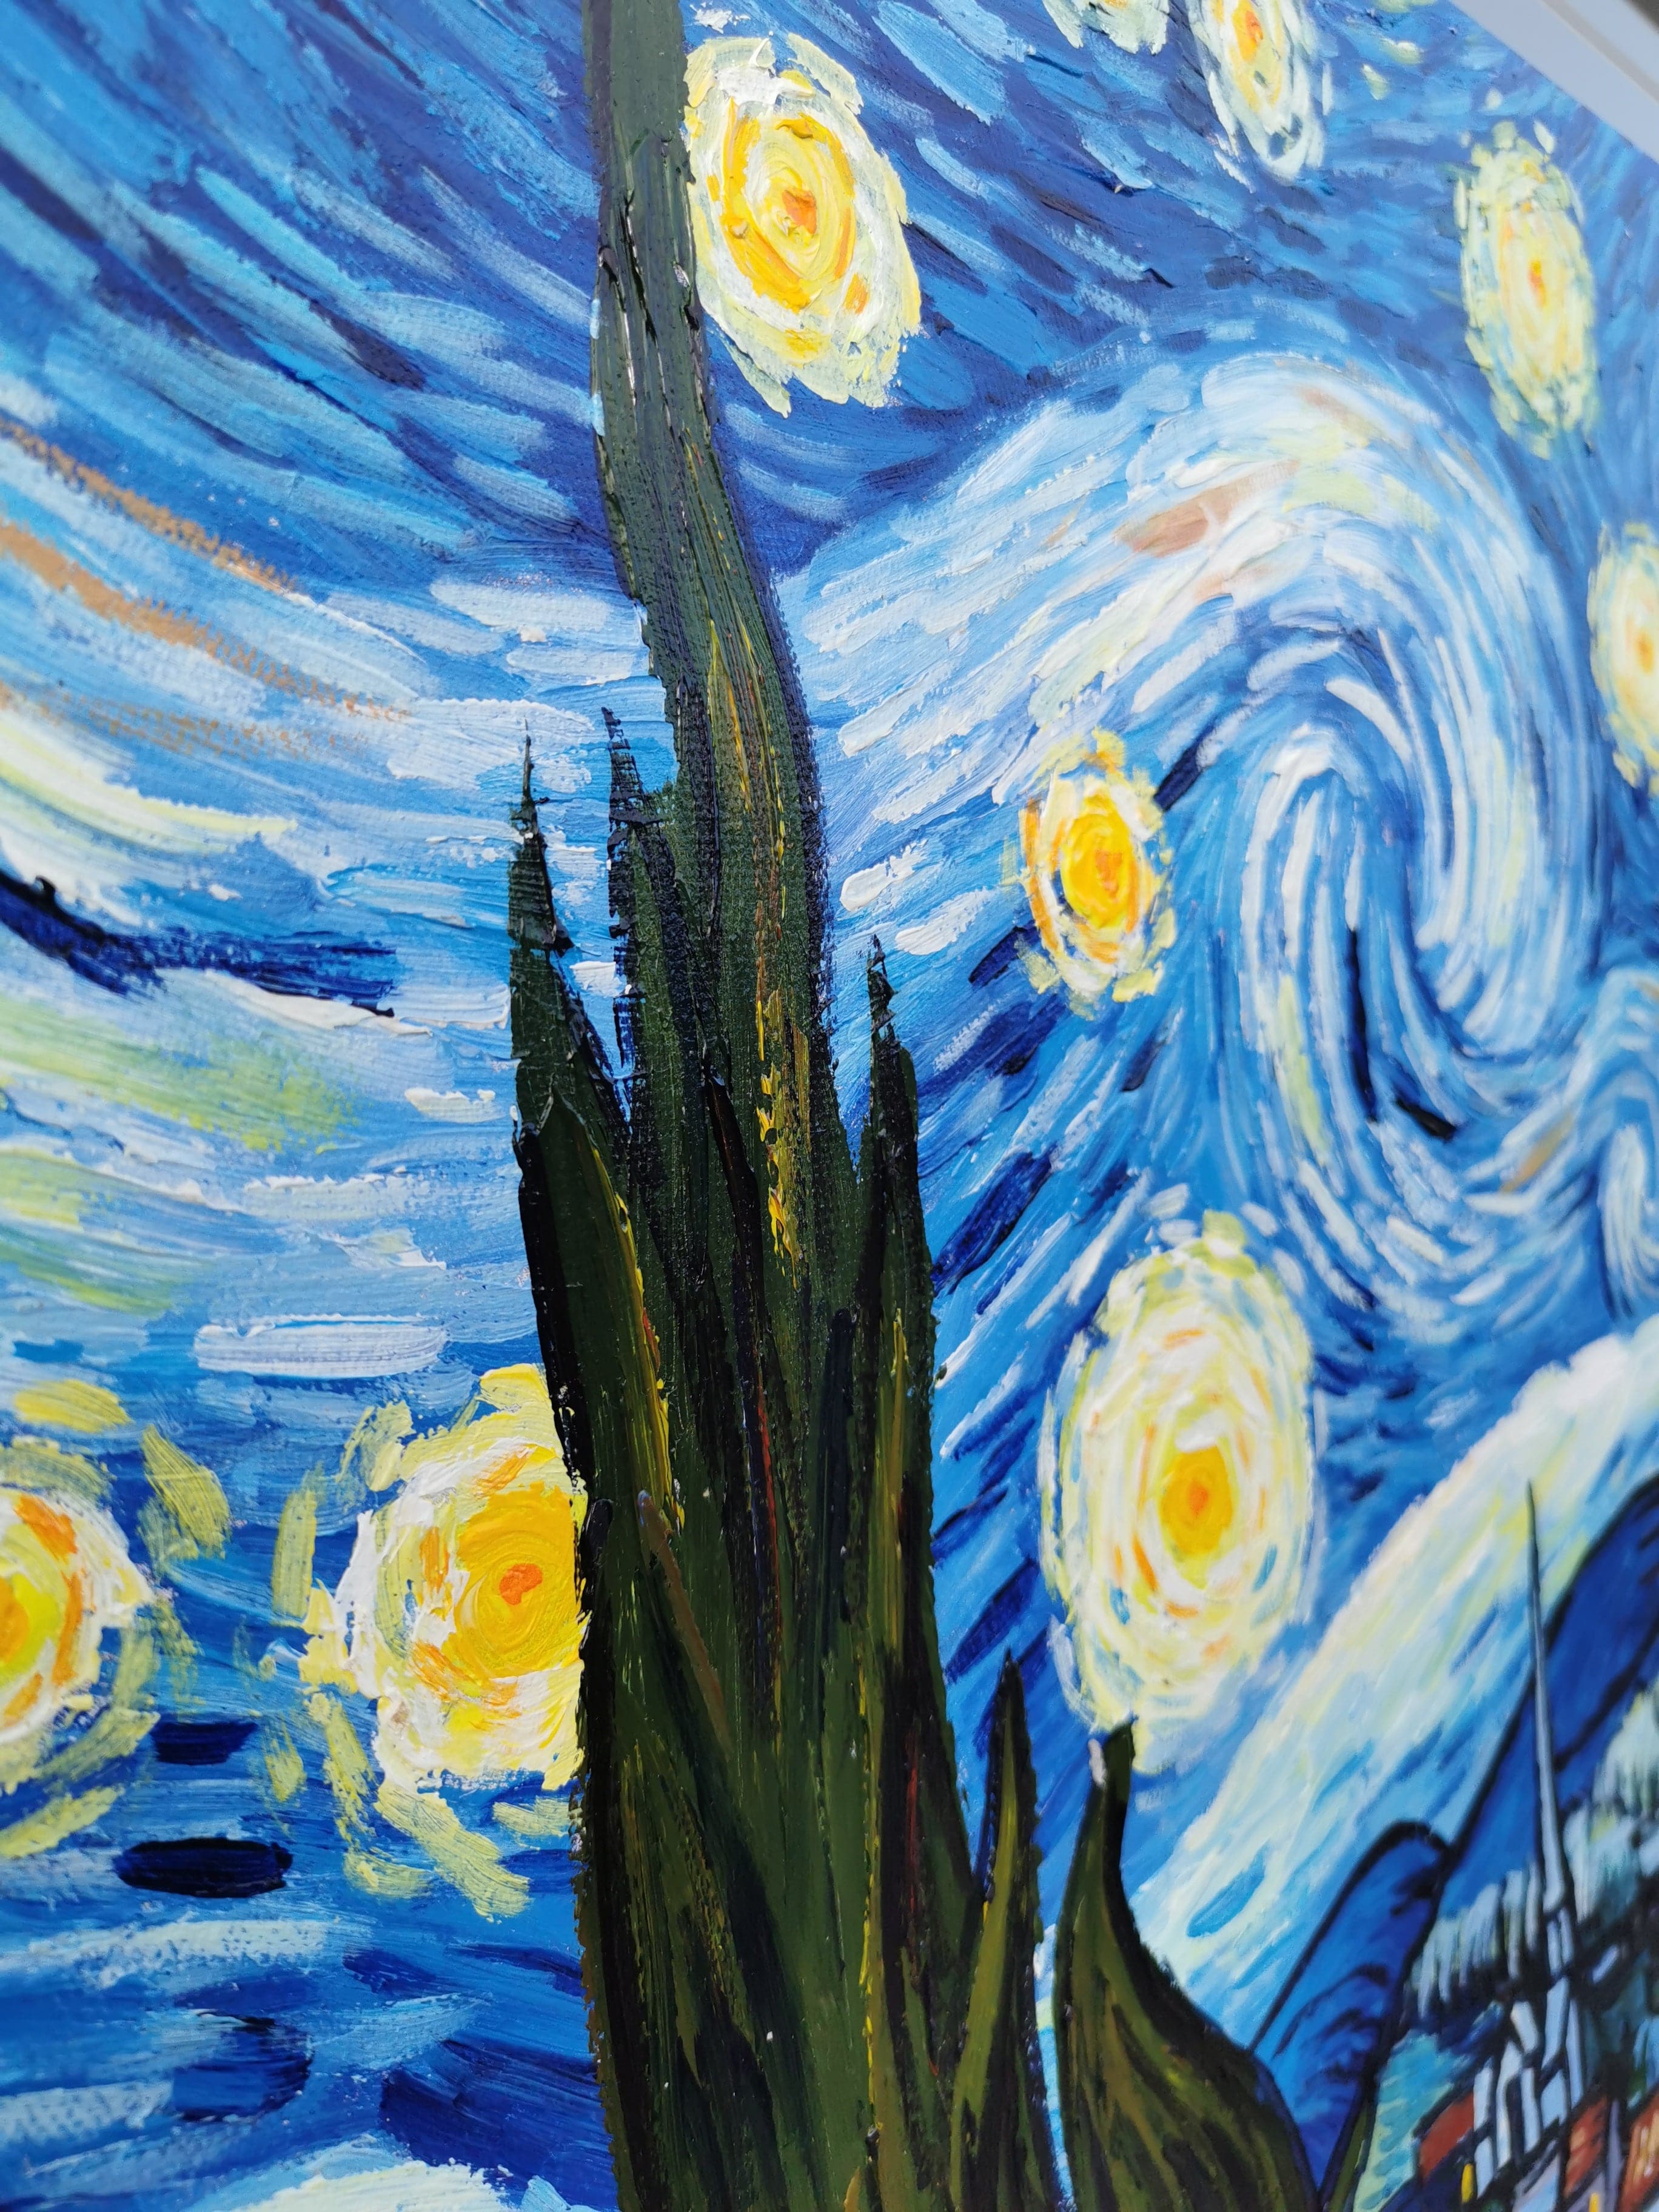 Framed 1 Panel - Oil Painting - The Starry Night (Van Gogh)